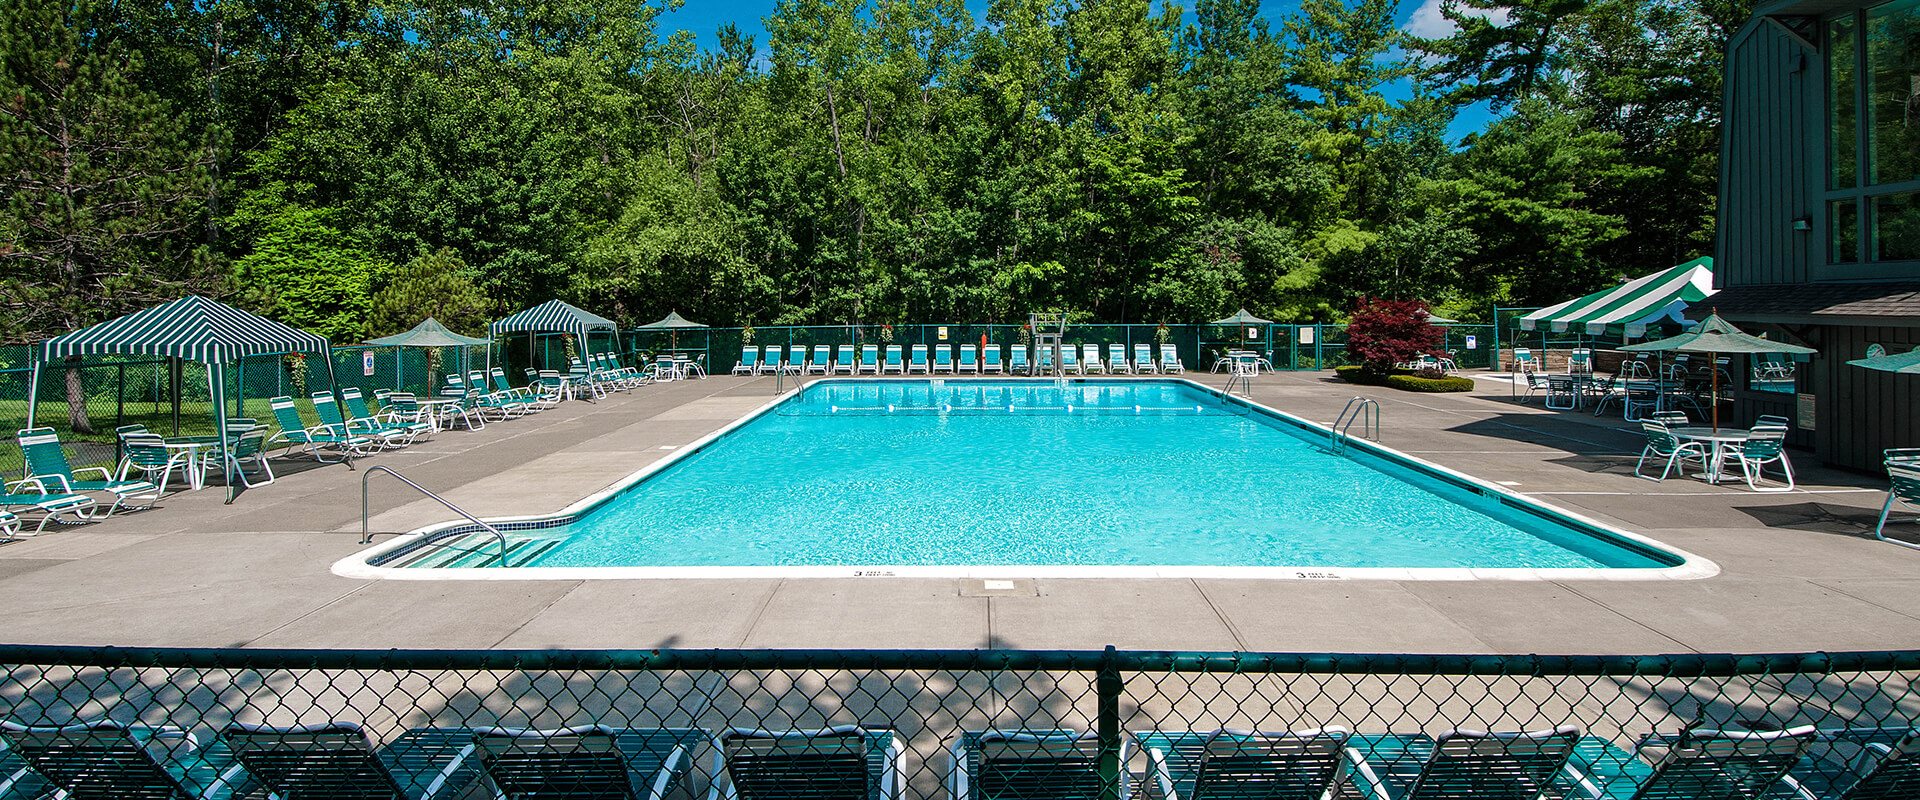 Regency Park Apartments Apartments In Guilderland Ny